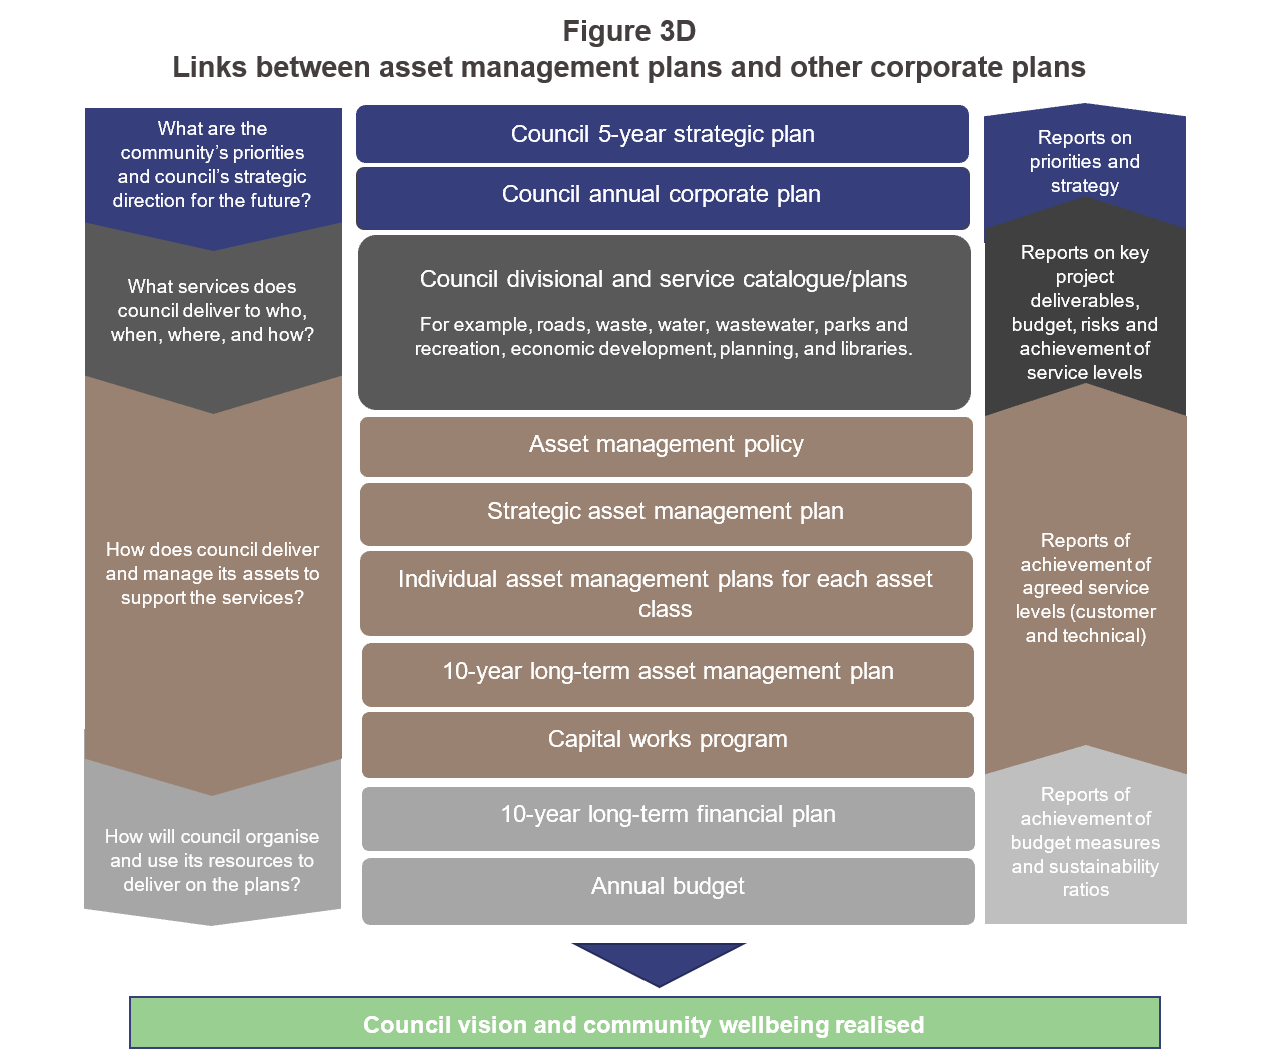 Links between asset management plans and other corporate plans